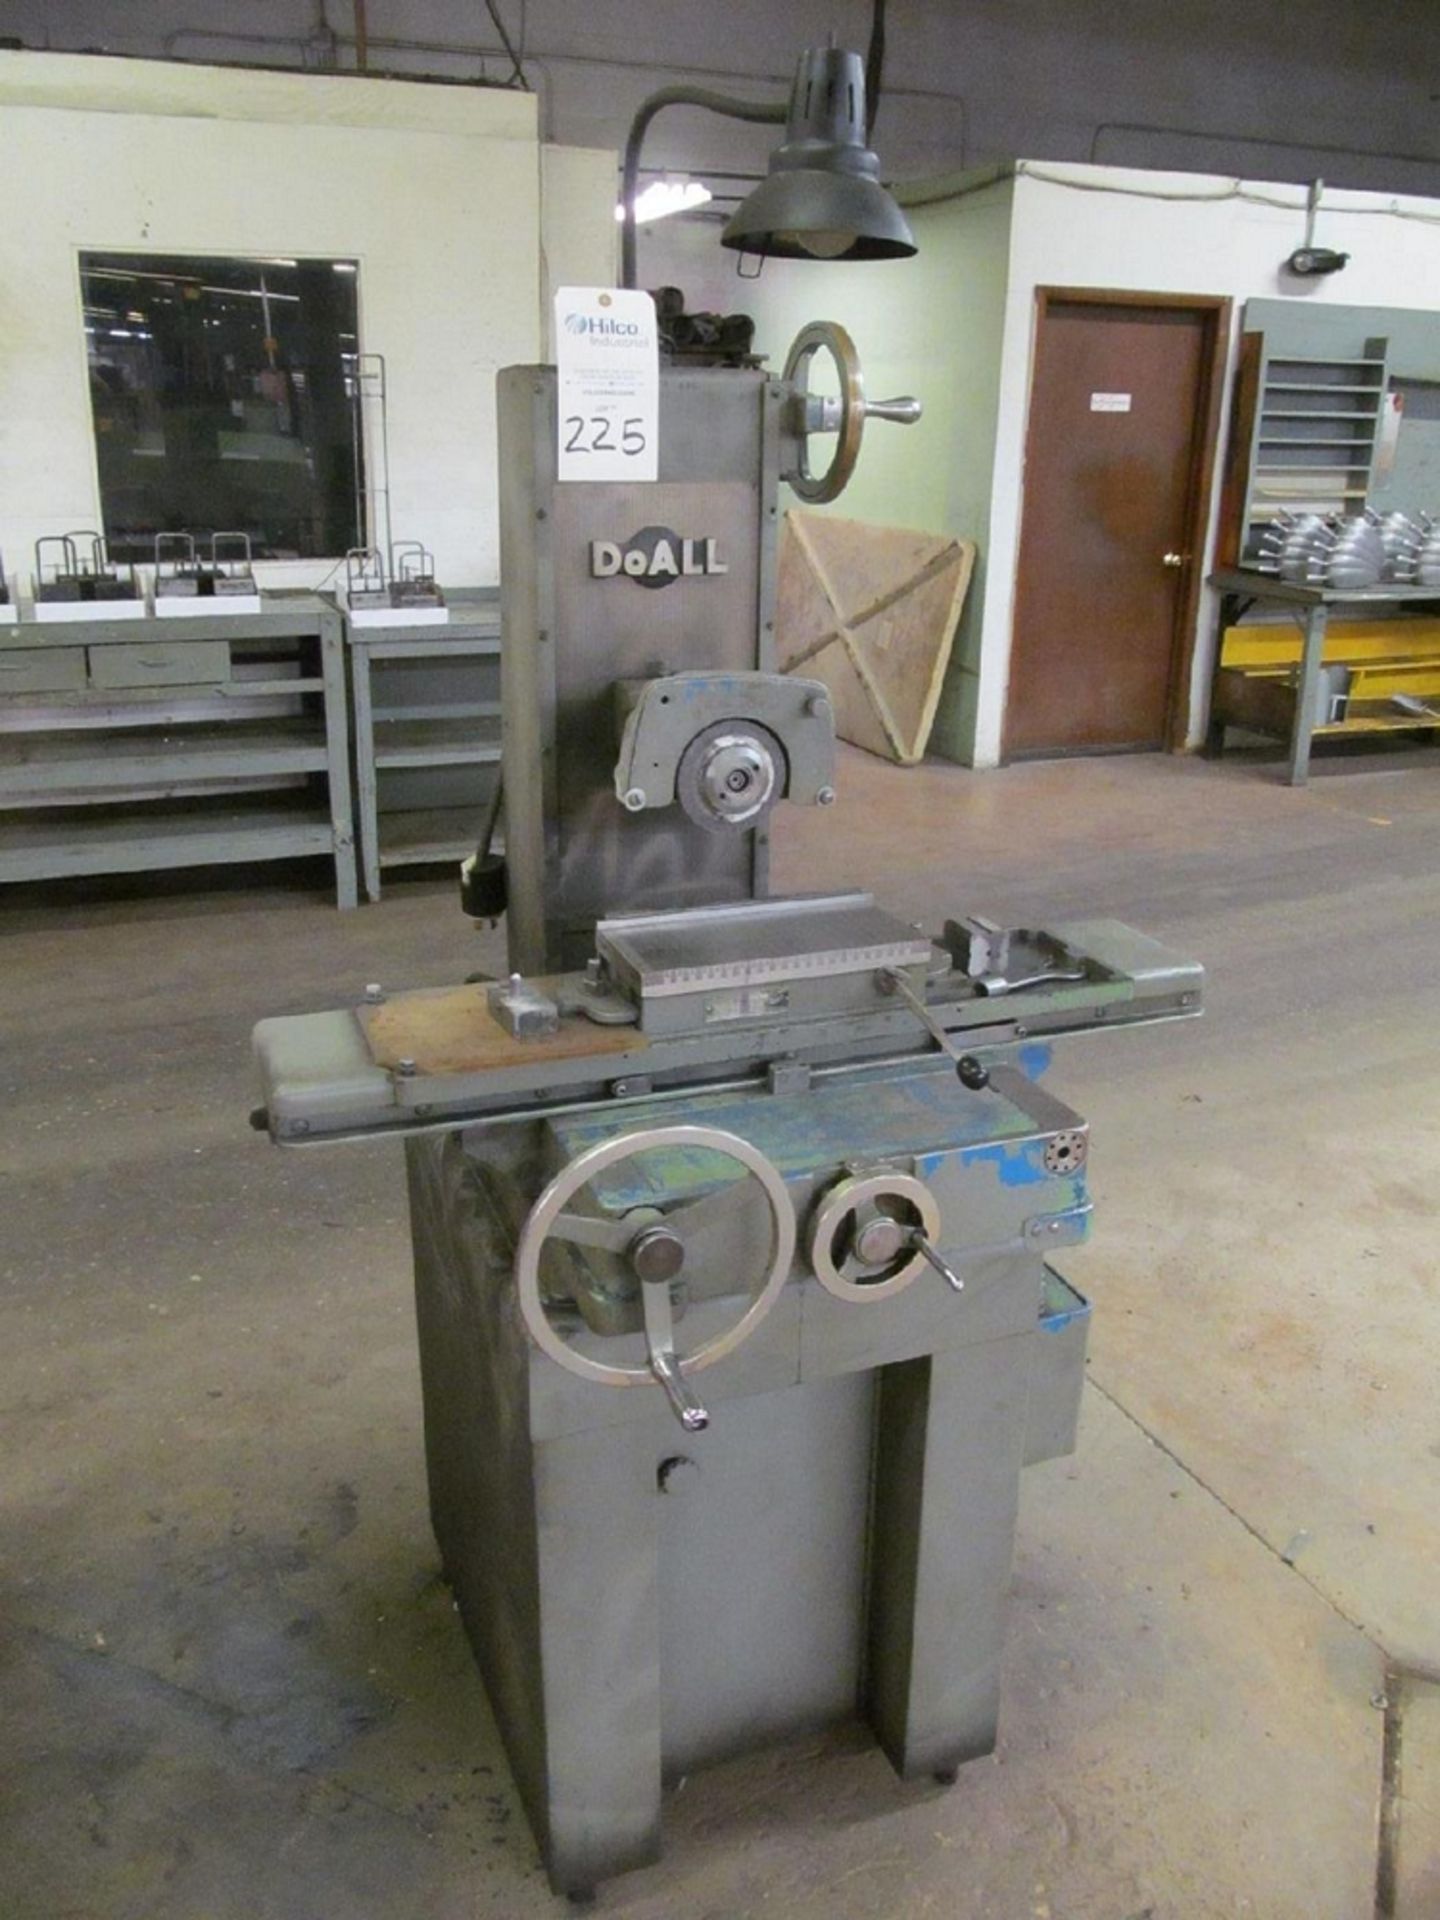 DoAll Model DH-612 6" x 12" Hand Surface Grinder - Image 3 of 3